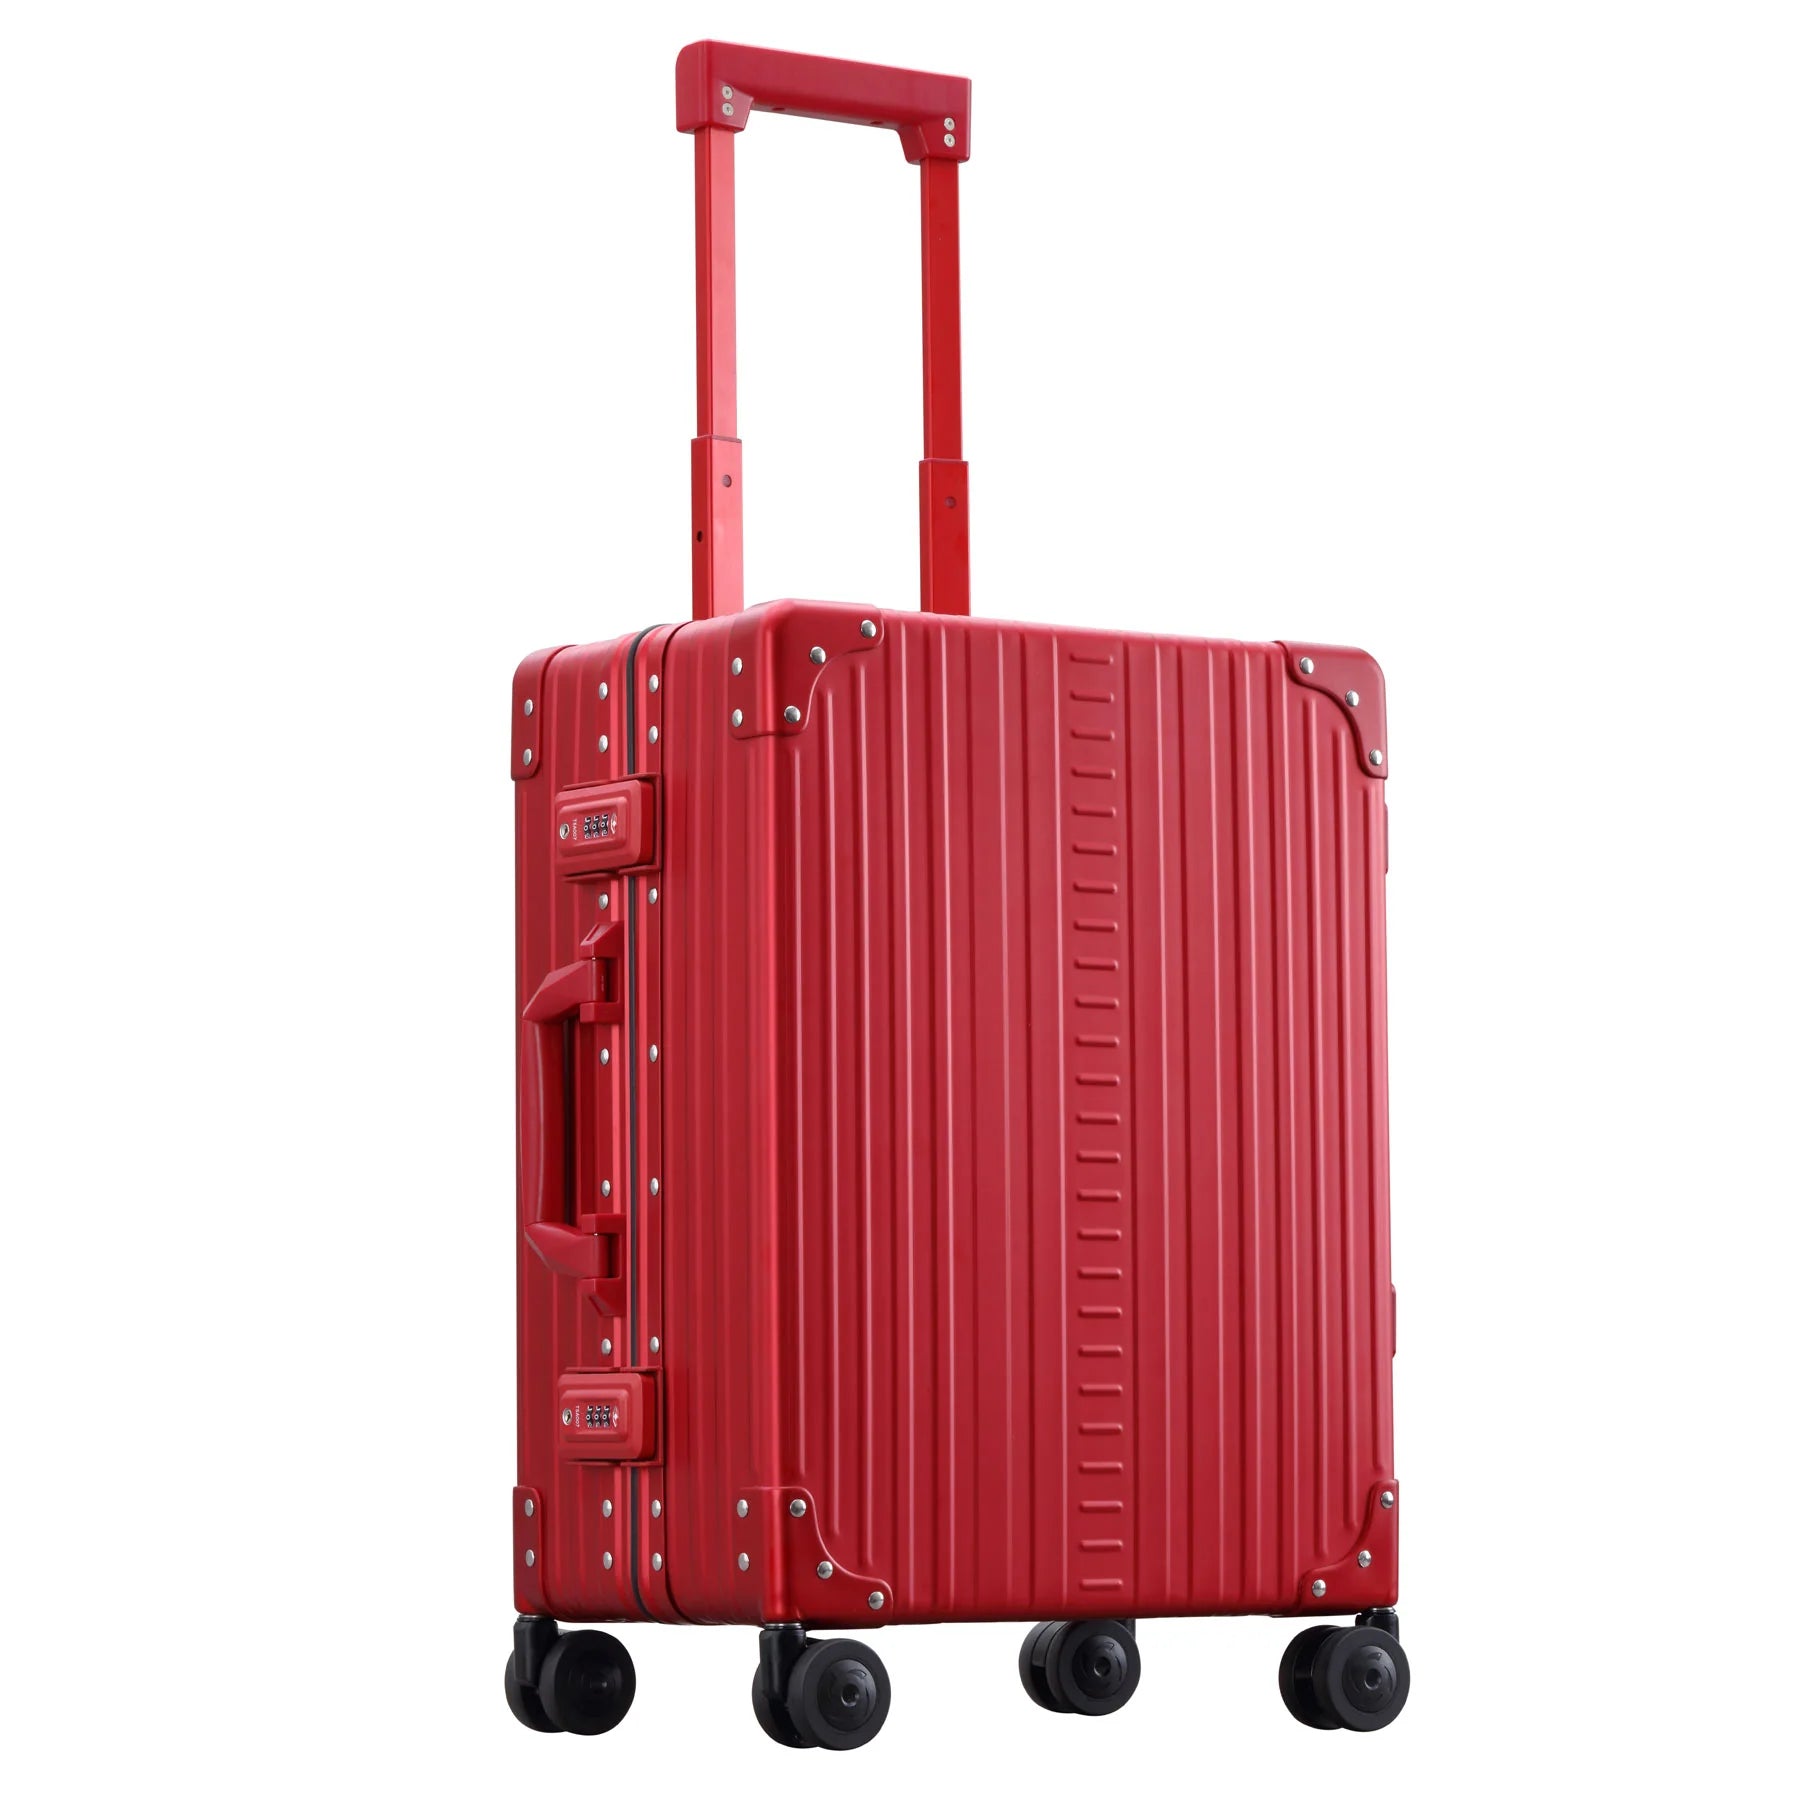 Multi-Size All Aluminum Hard Shell Luggage Case Carry on Spinner Suitcase by Tra